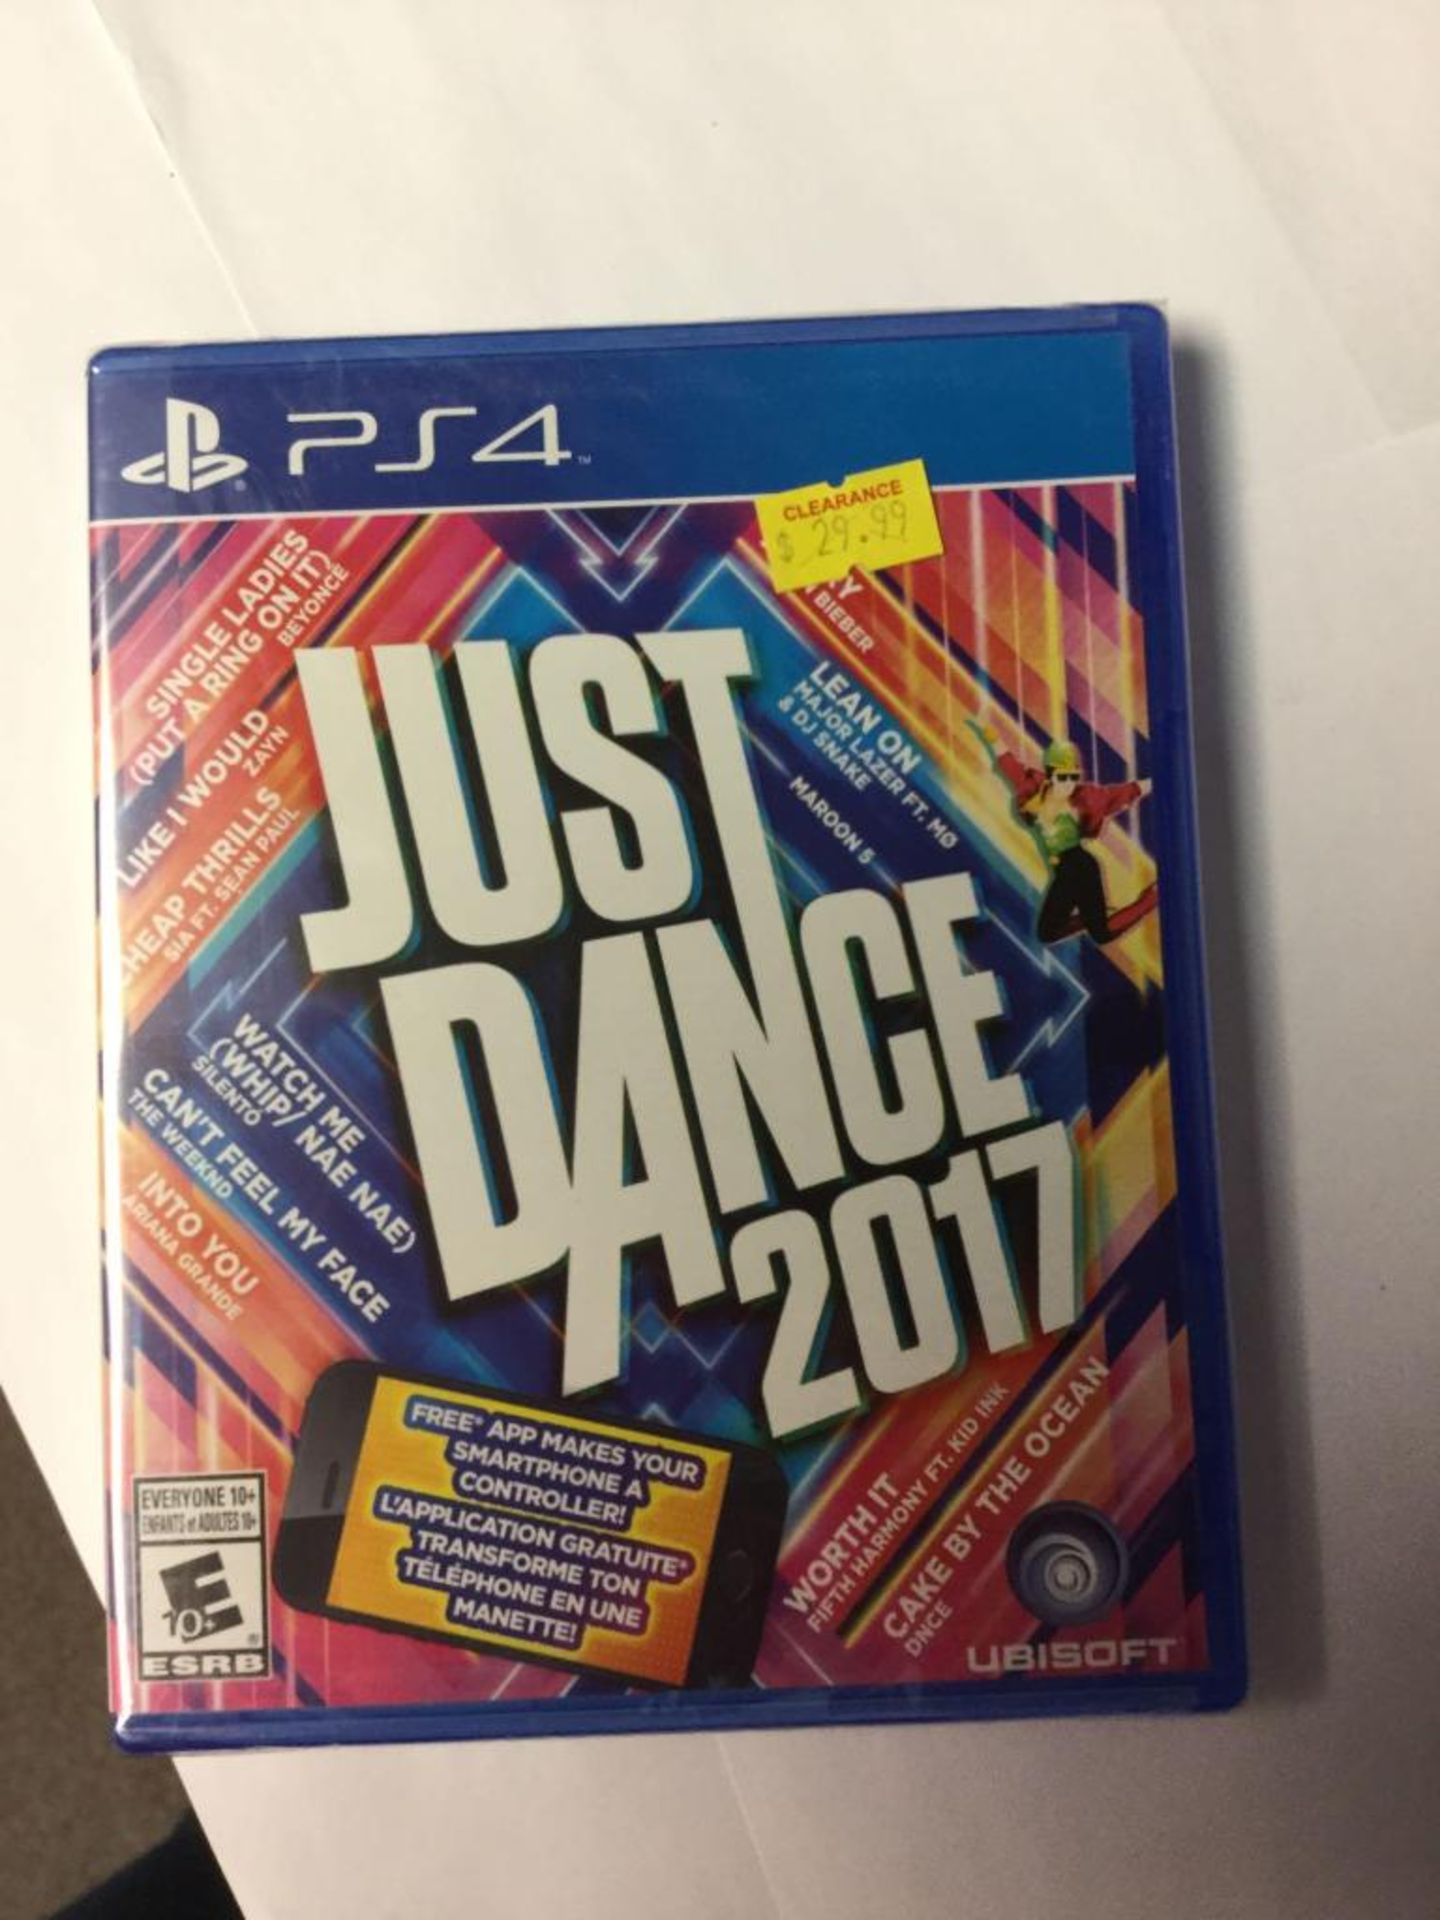 PS4 Just Dance 2017 - Game